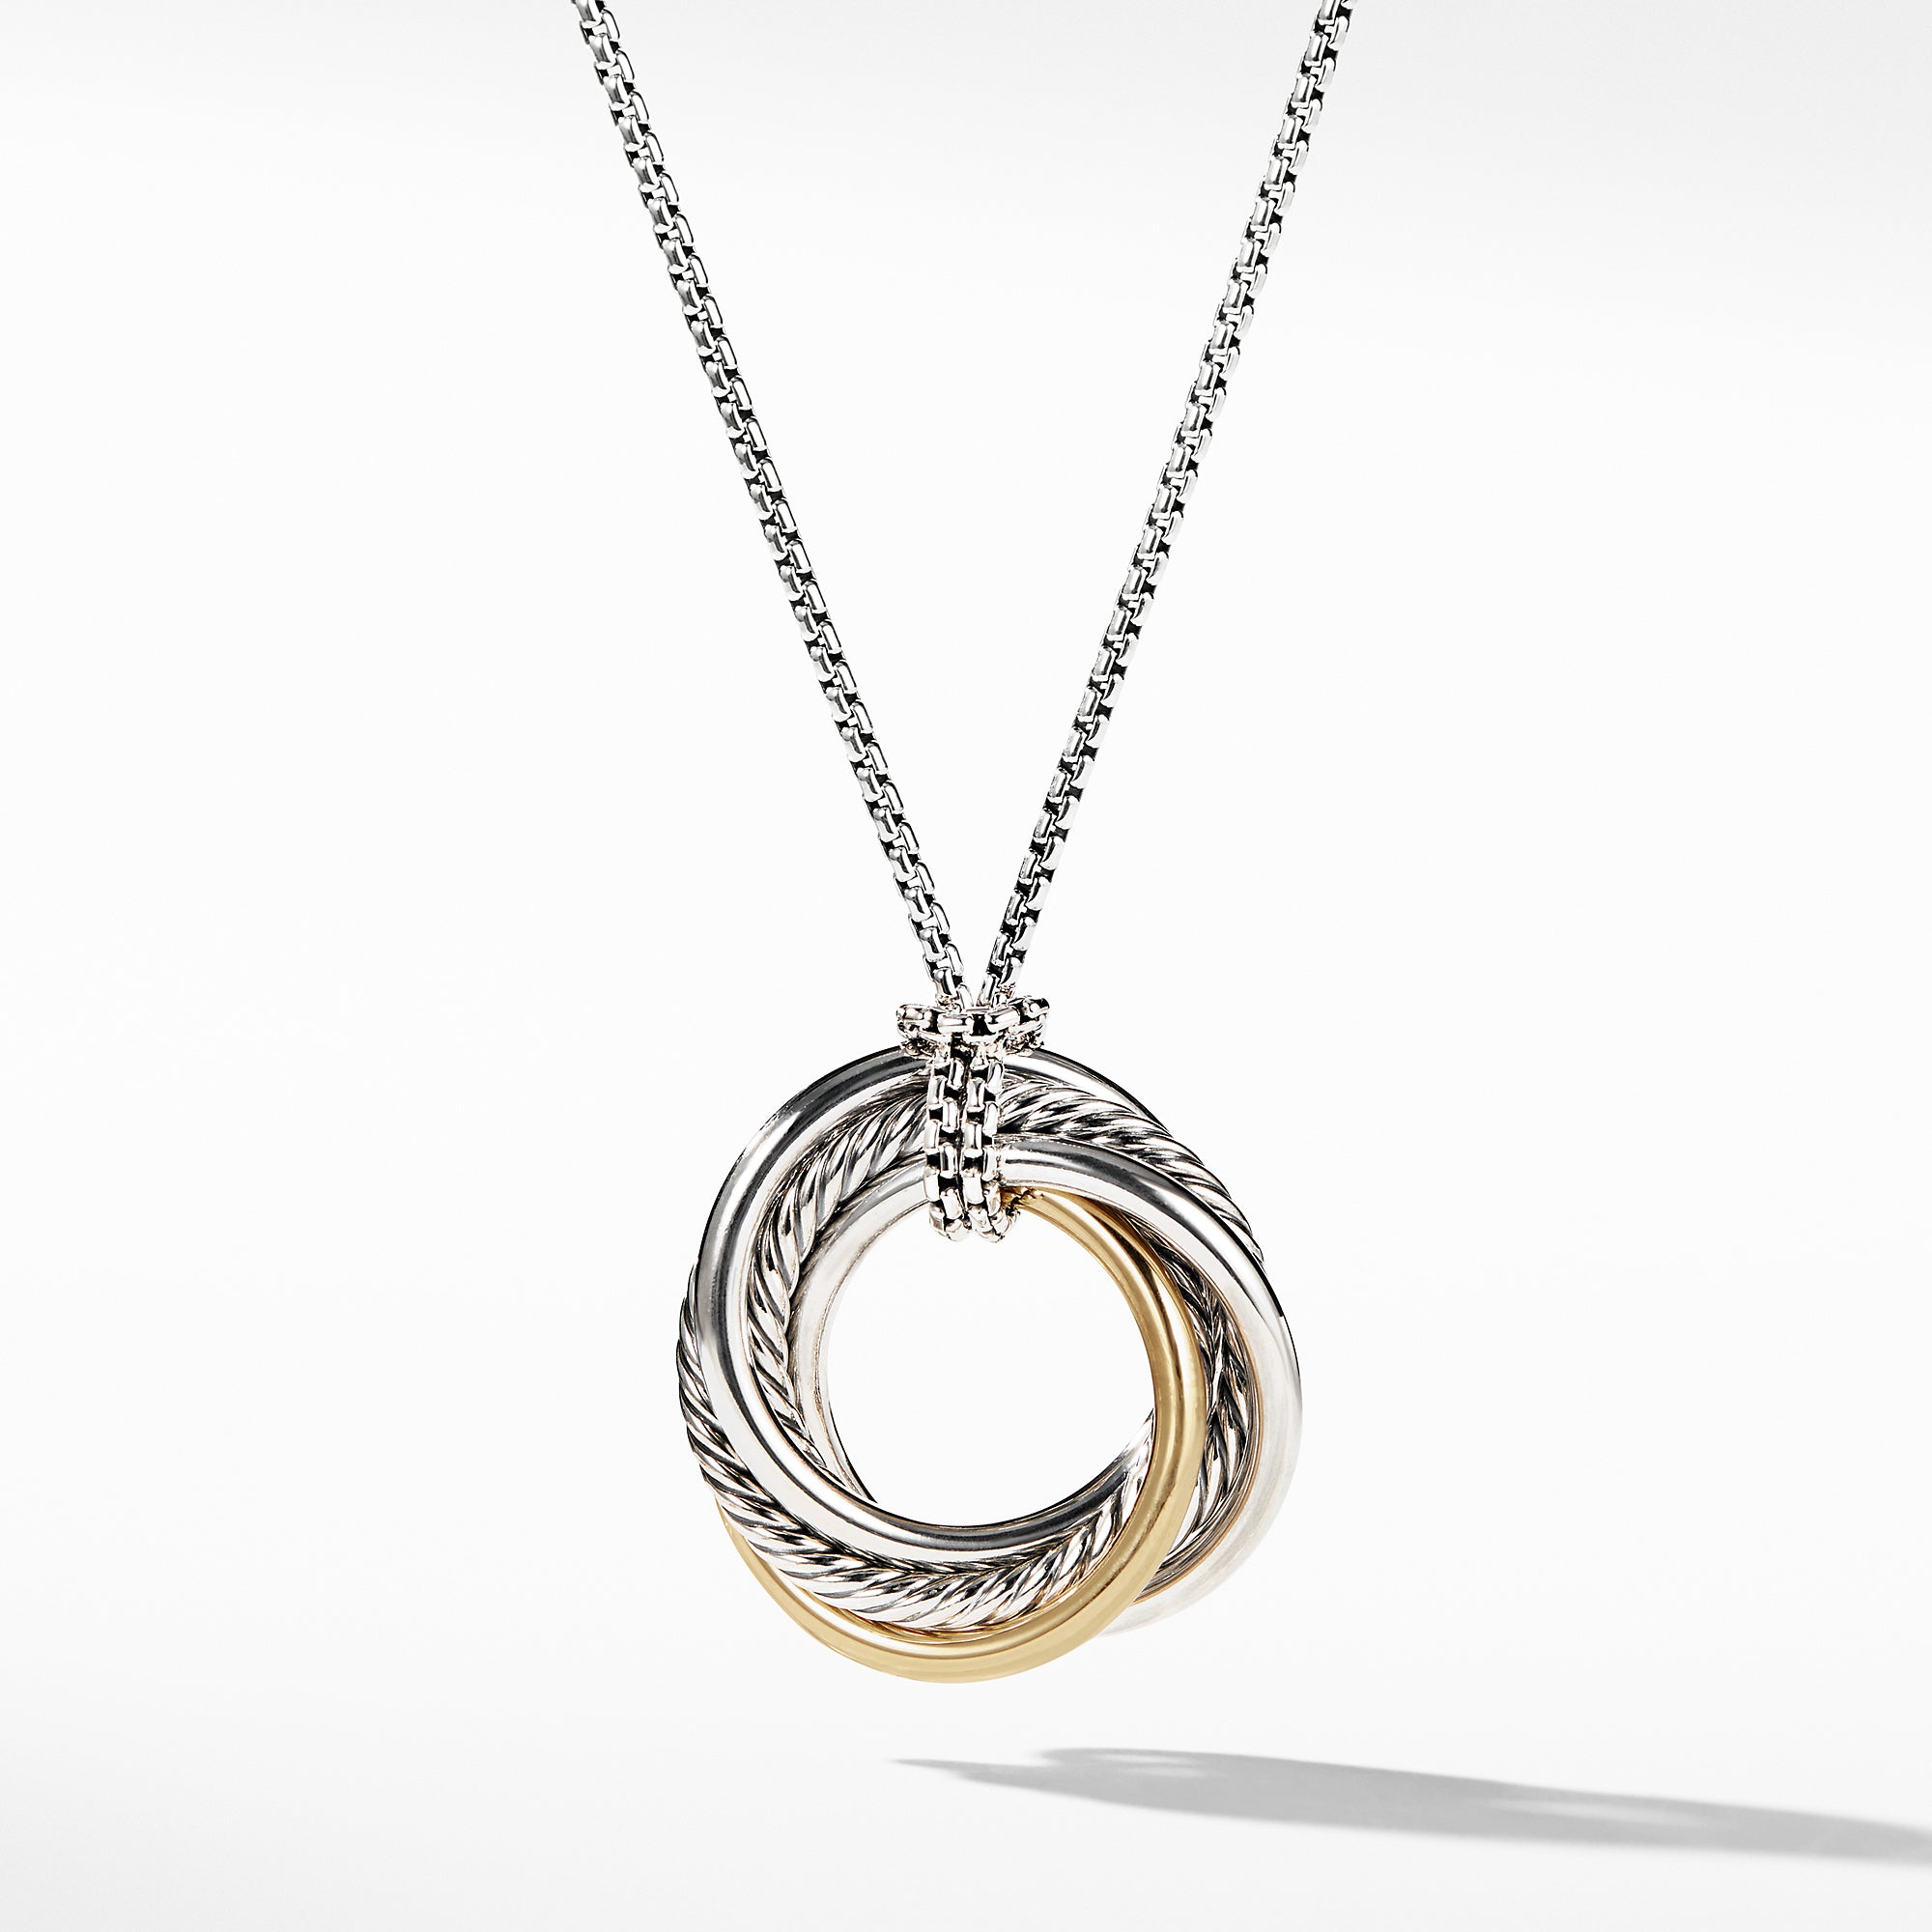 with Pendant N11641 S4 Small Jewelers David Yurman Crossover – Necklace Gold- Fine Moyer